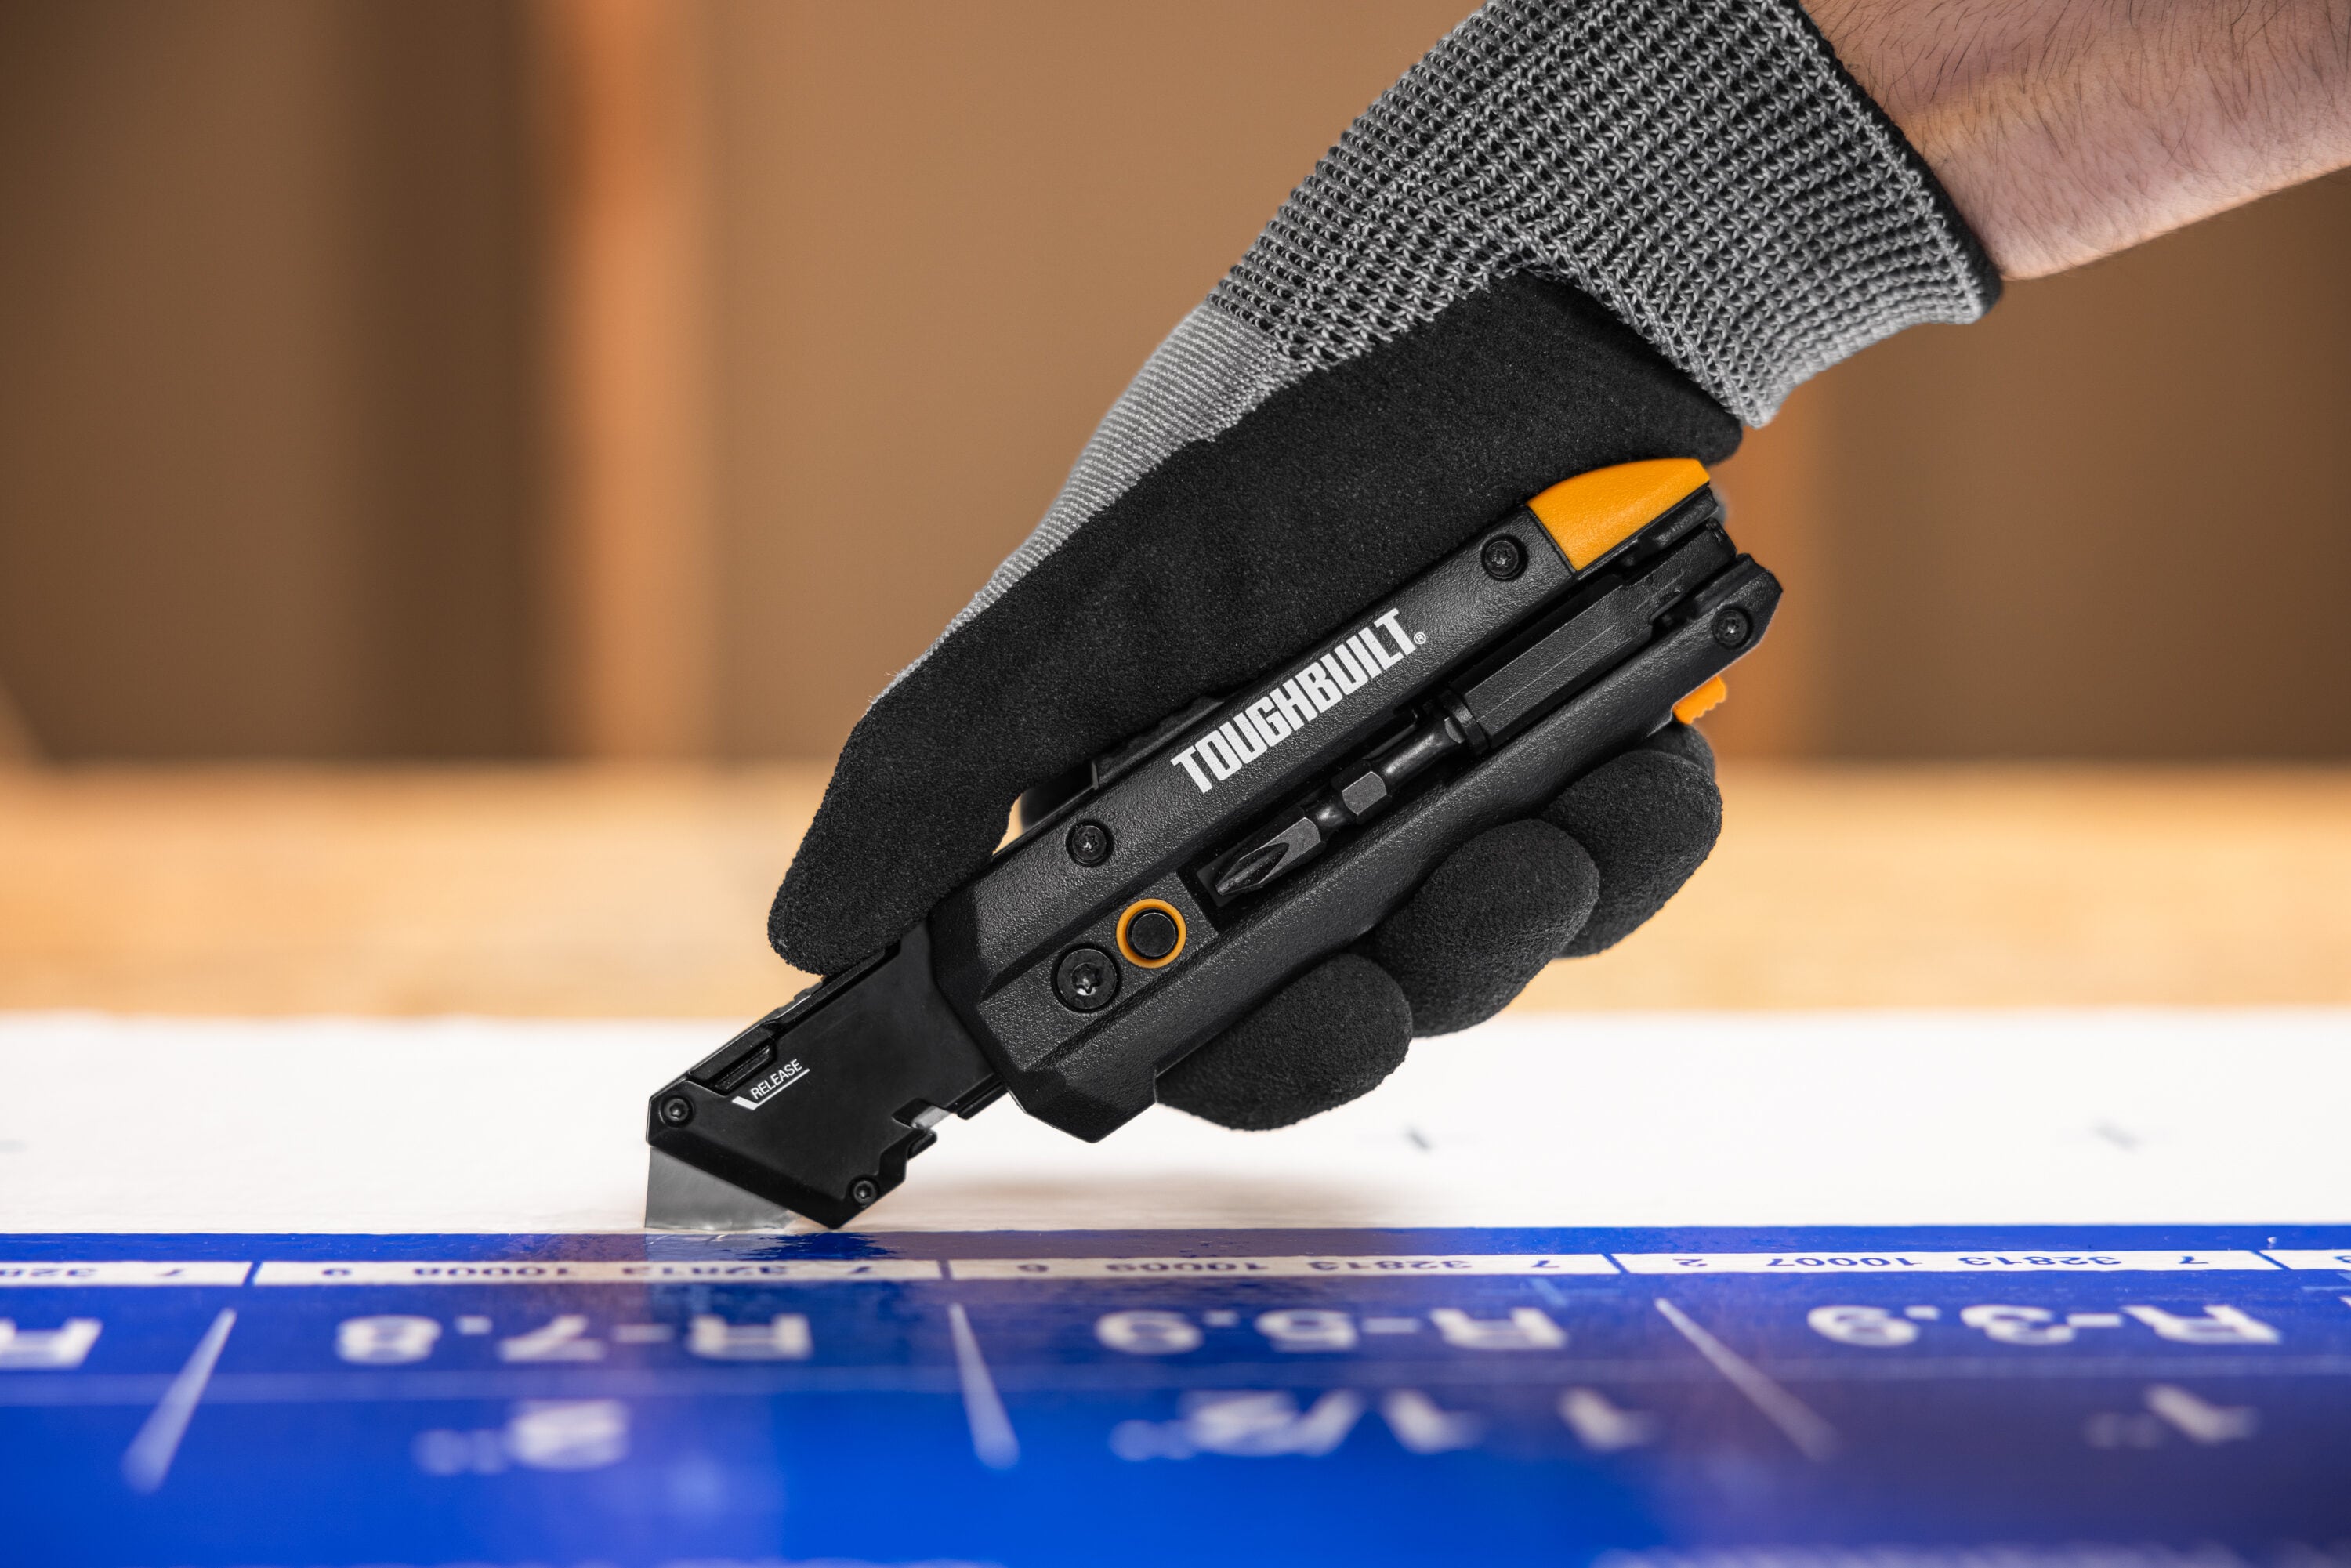 TOUGHBUILT Duct 1-in-Blade Utility Knife in the Utility Knives